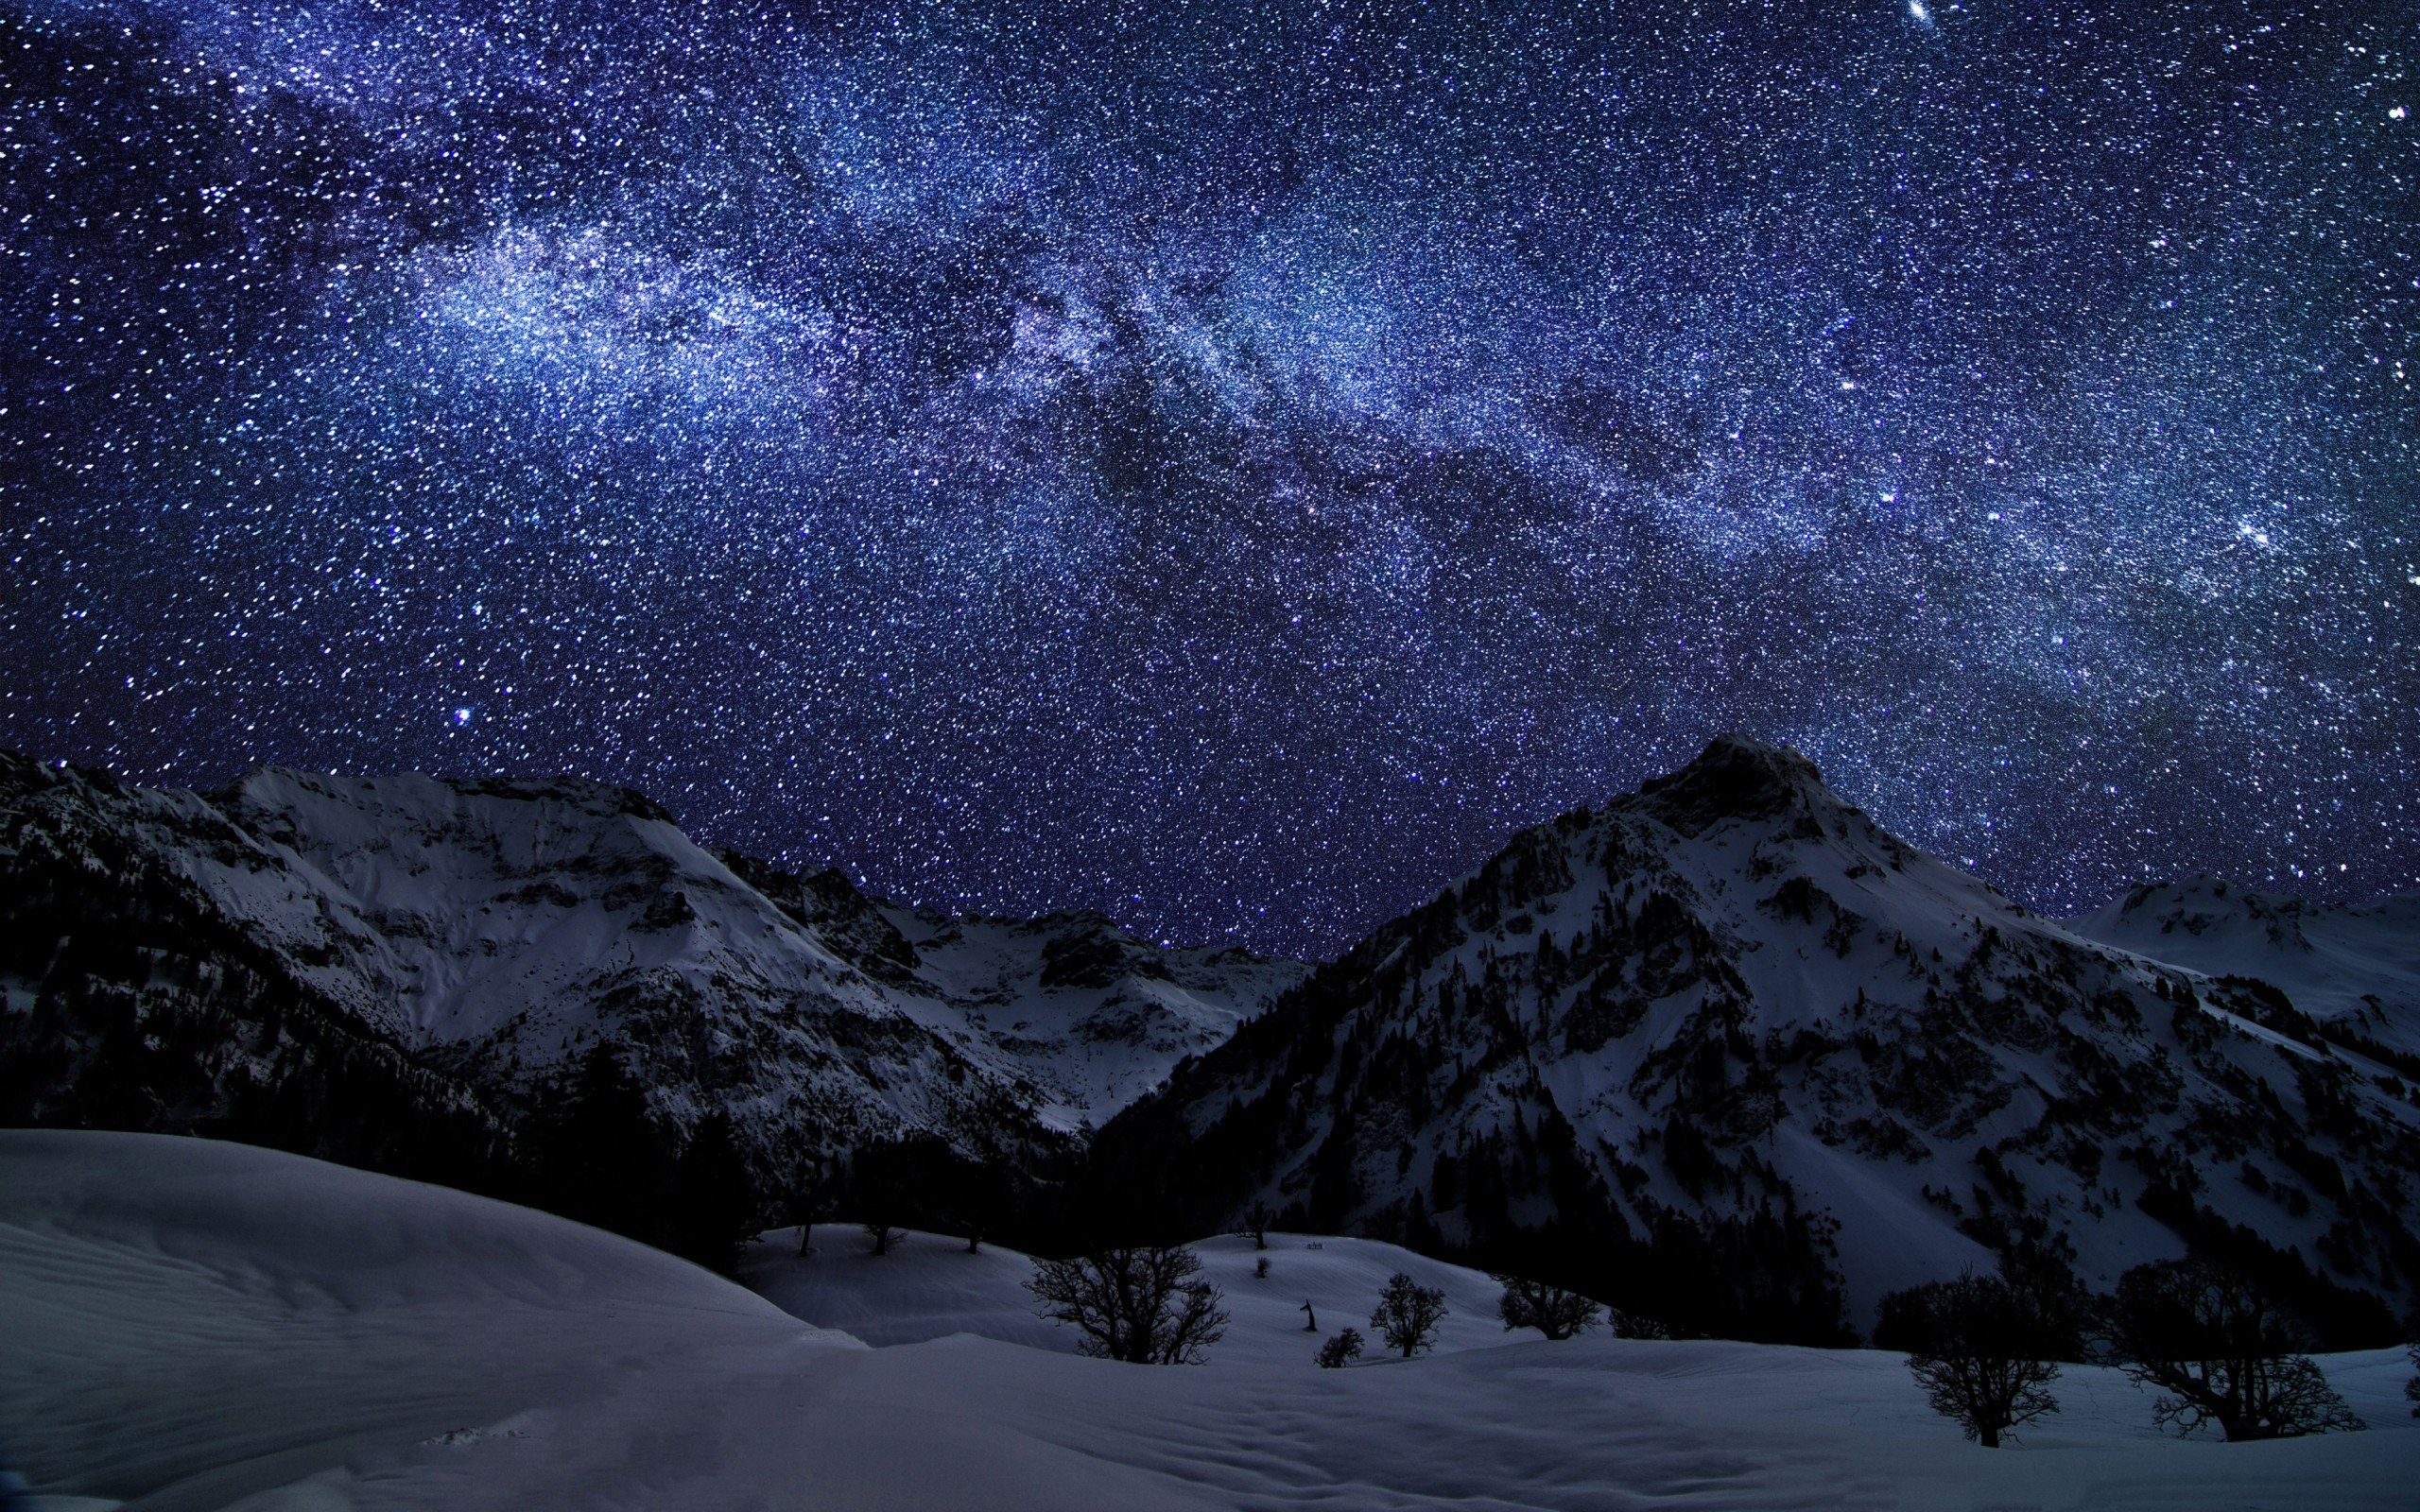  Bavaria long exposure Milky Way HDR photography wallpaper background